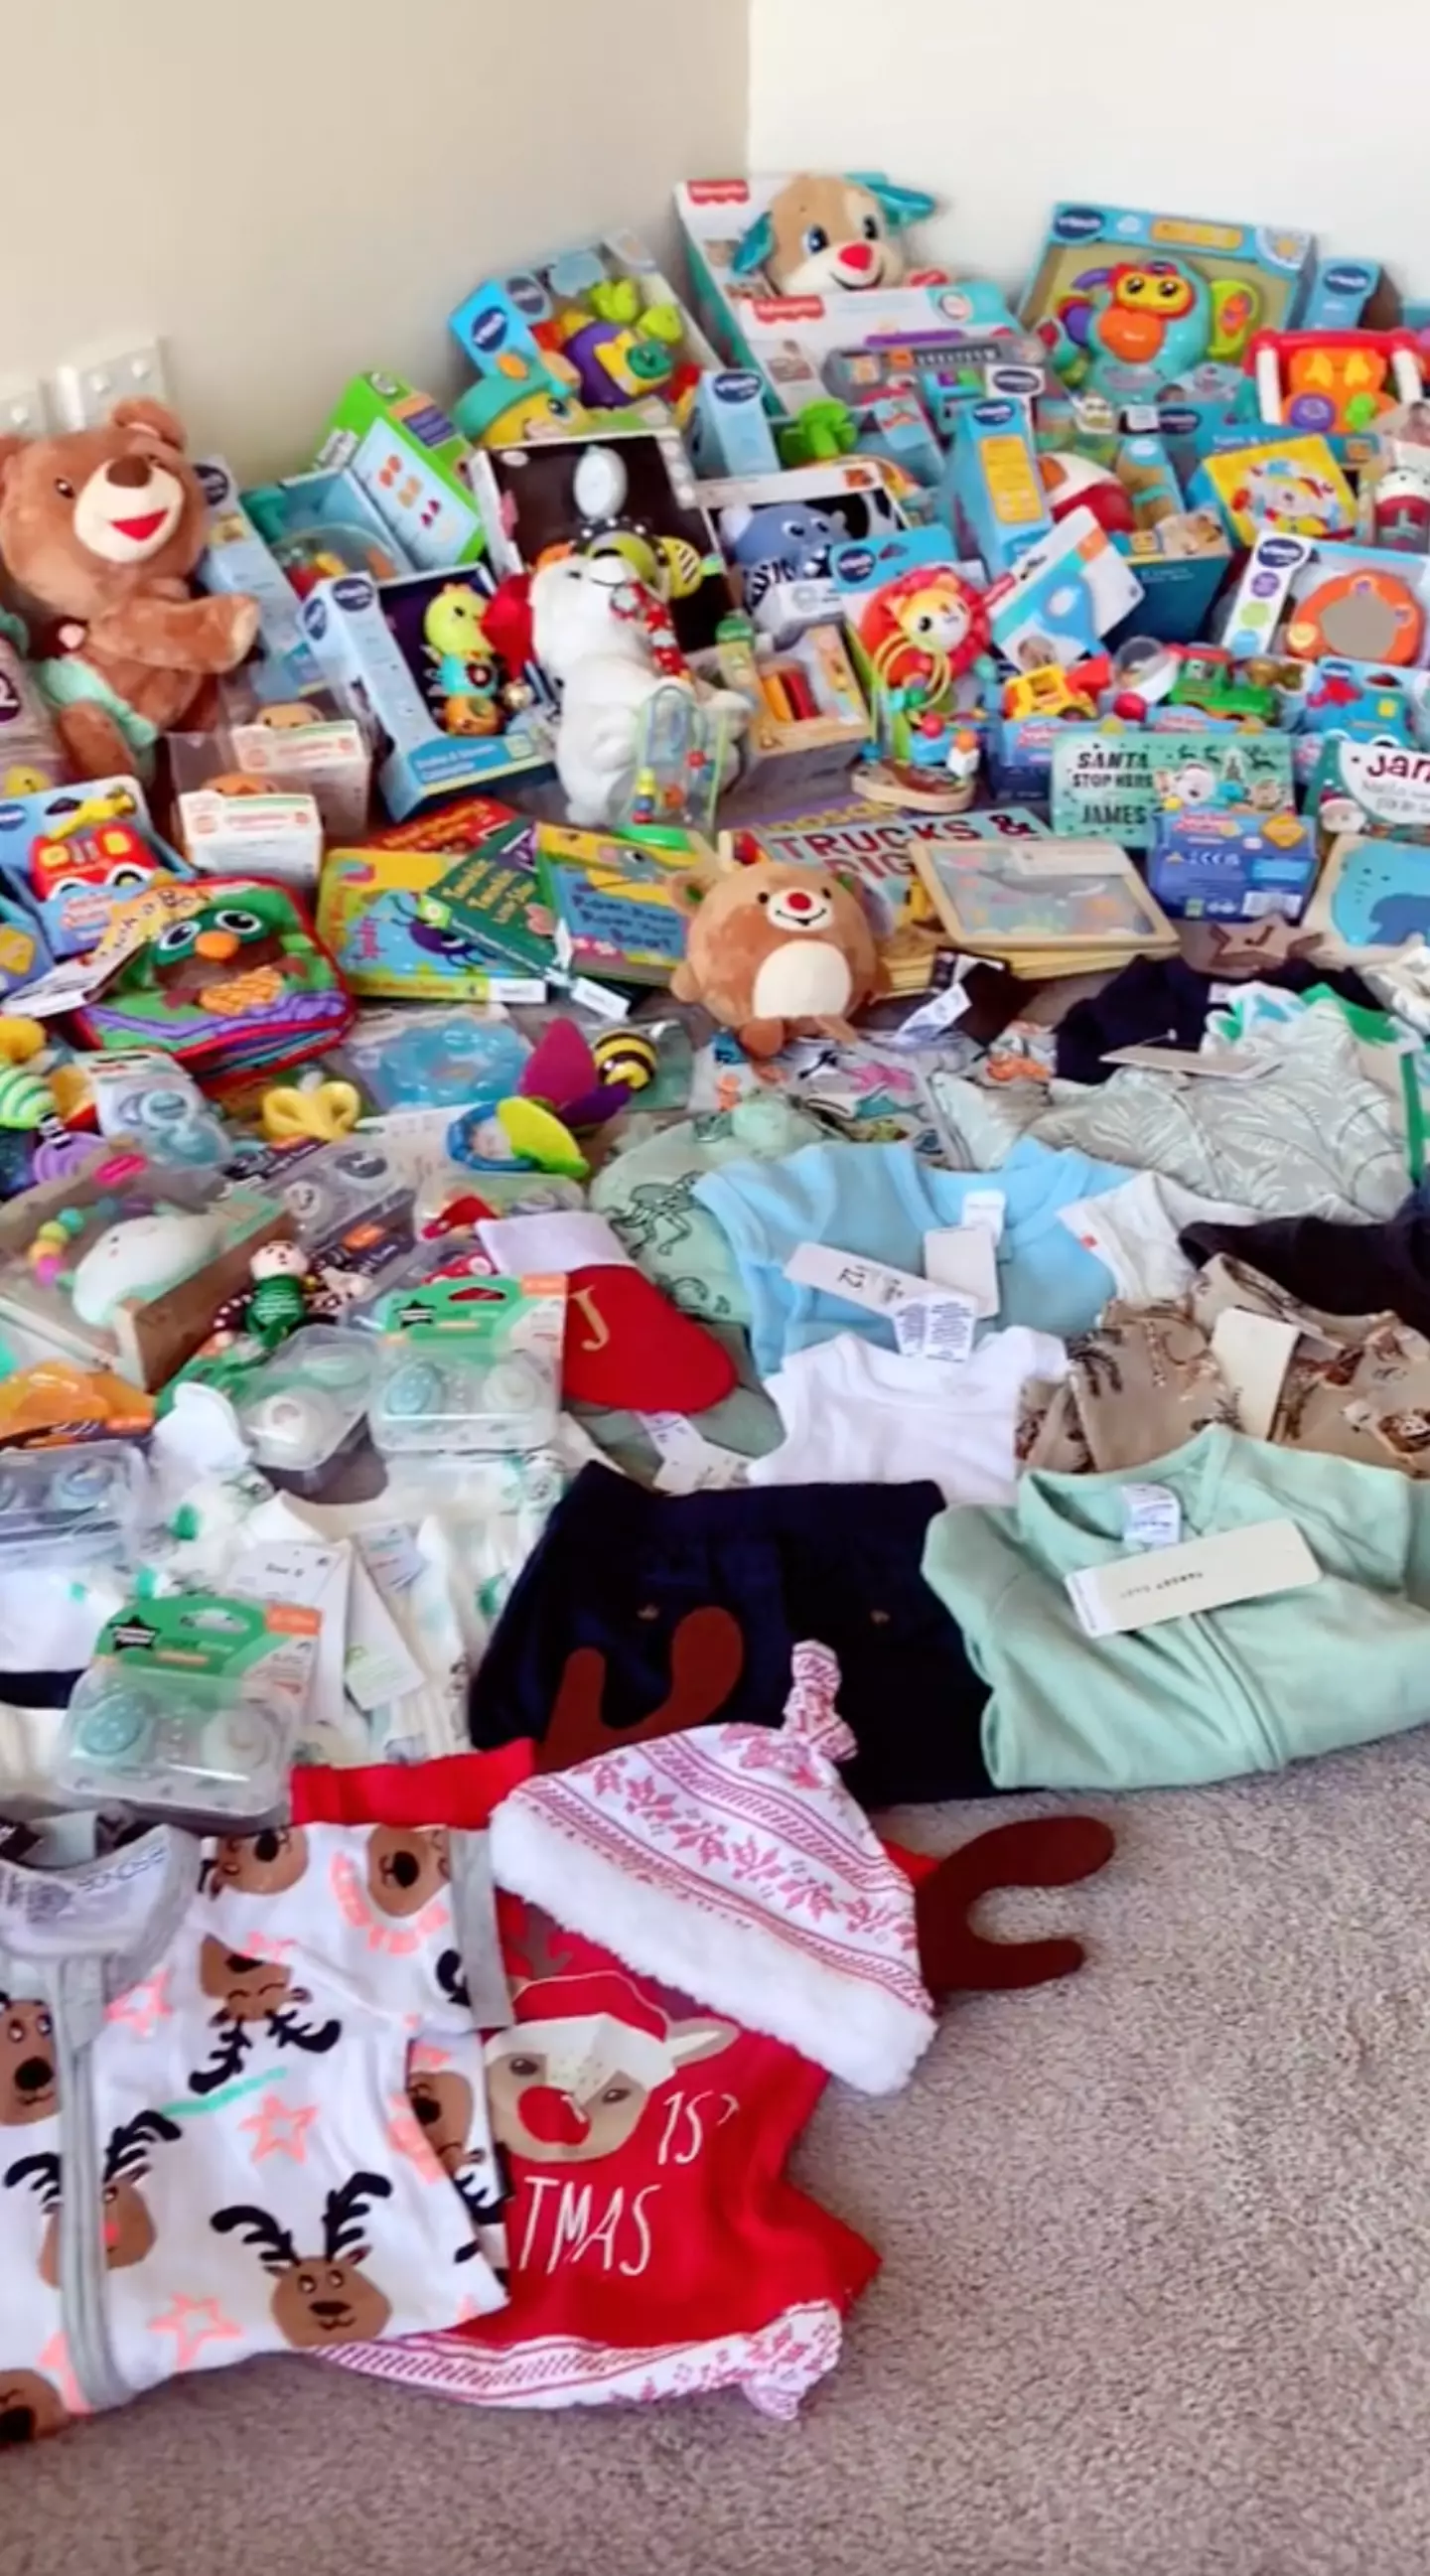 The baby's Christmas presents haul seemed to split the internet right down the middle.